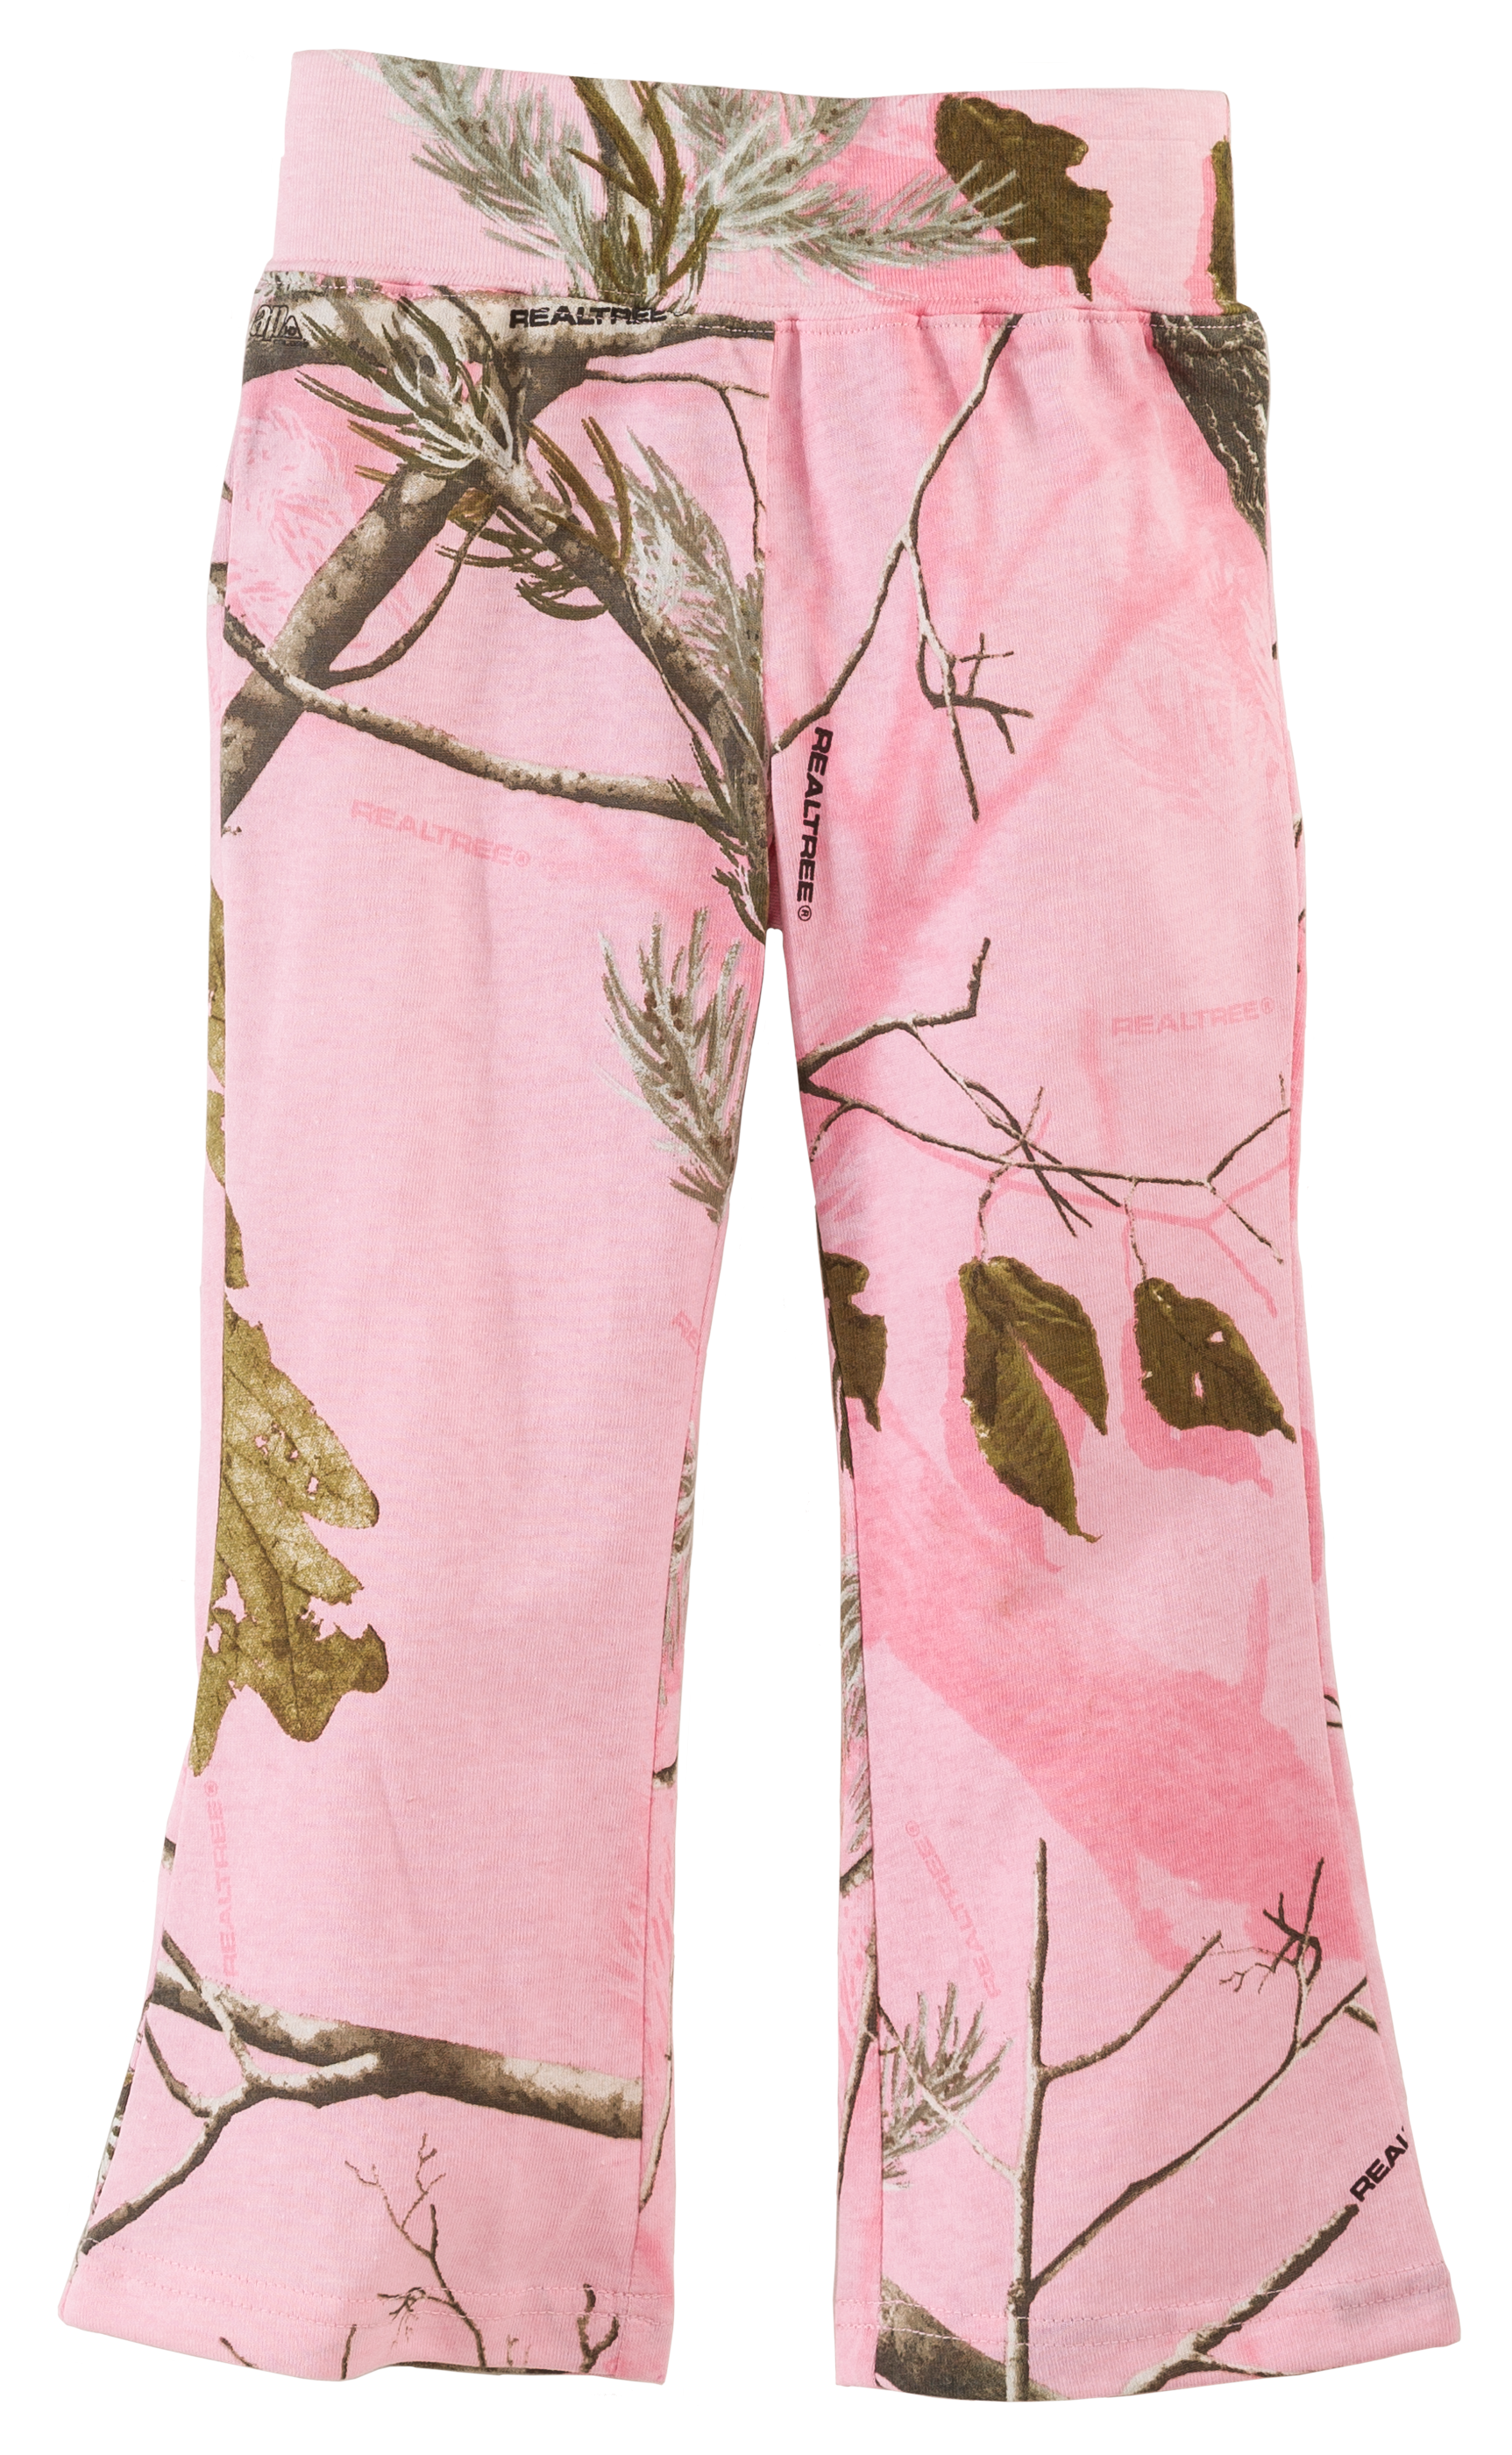 Bass Pro Shops Realtree APC Pink Camo Yoga Pants for Babies or Toddler Girls